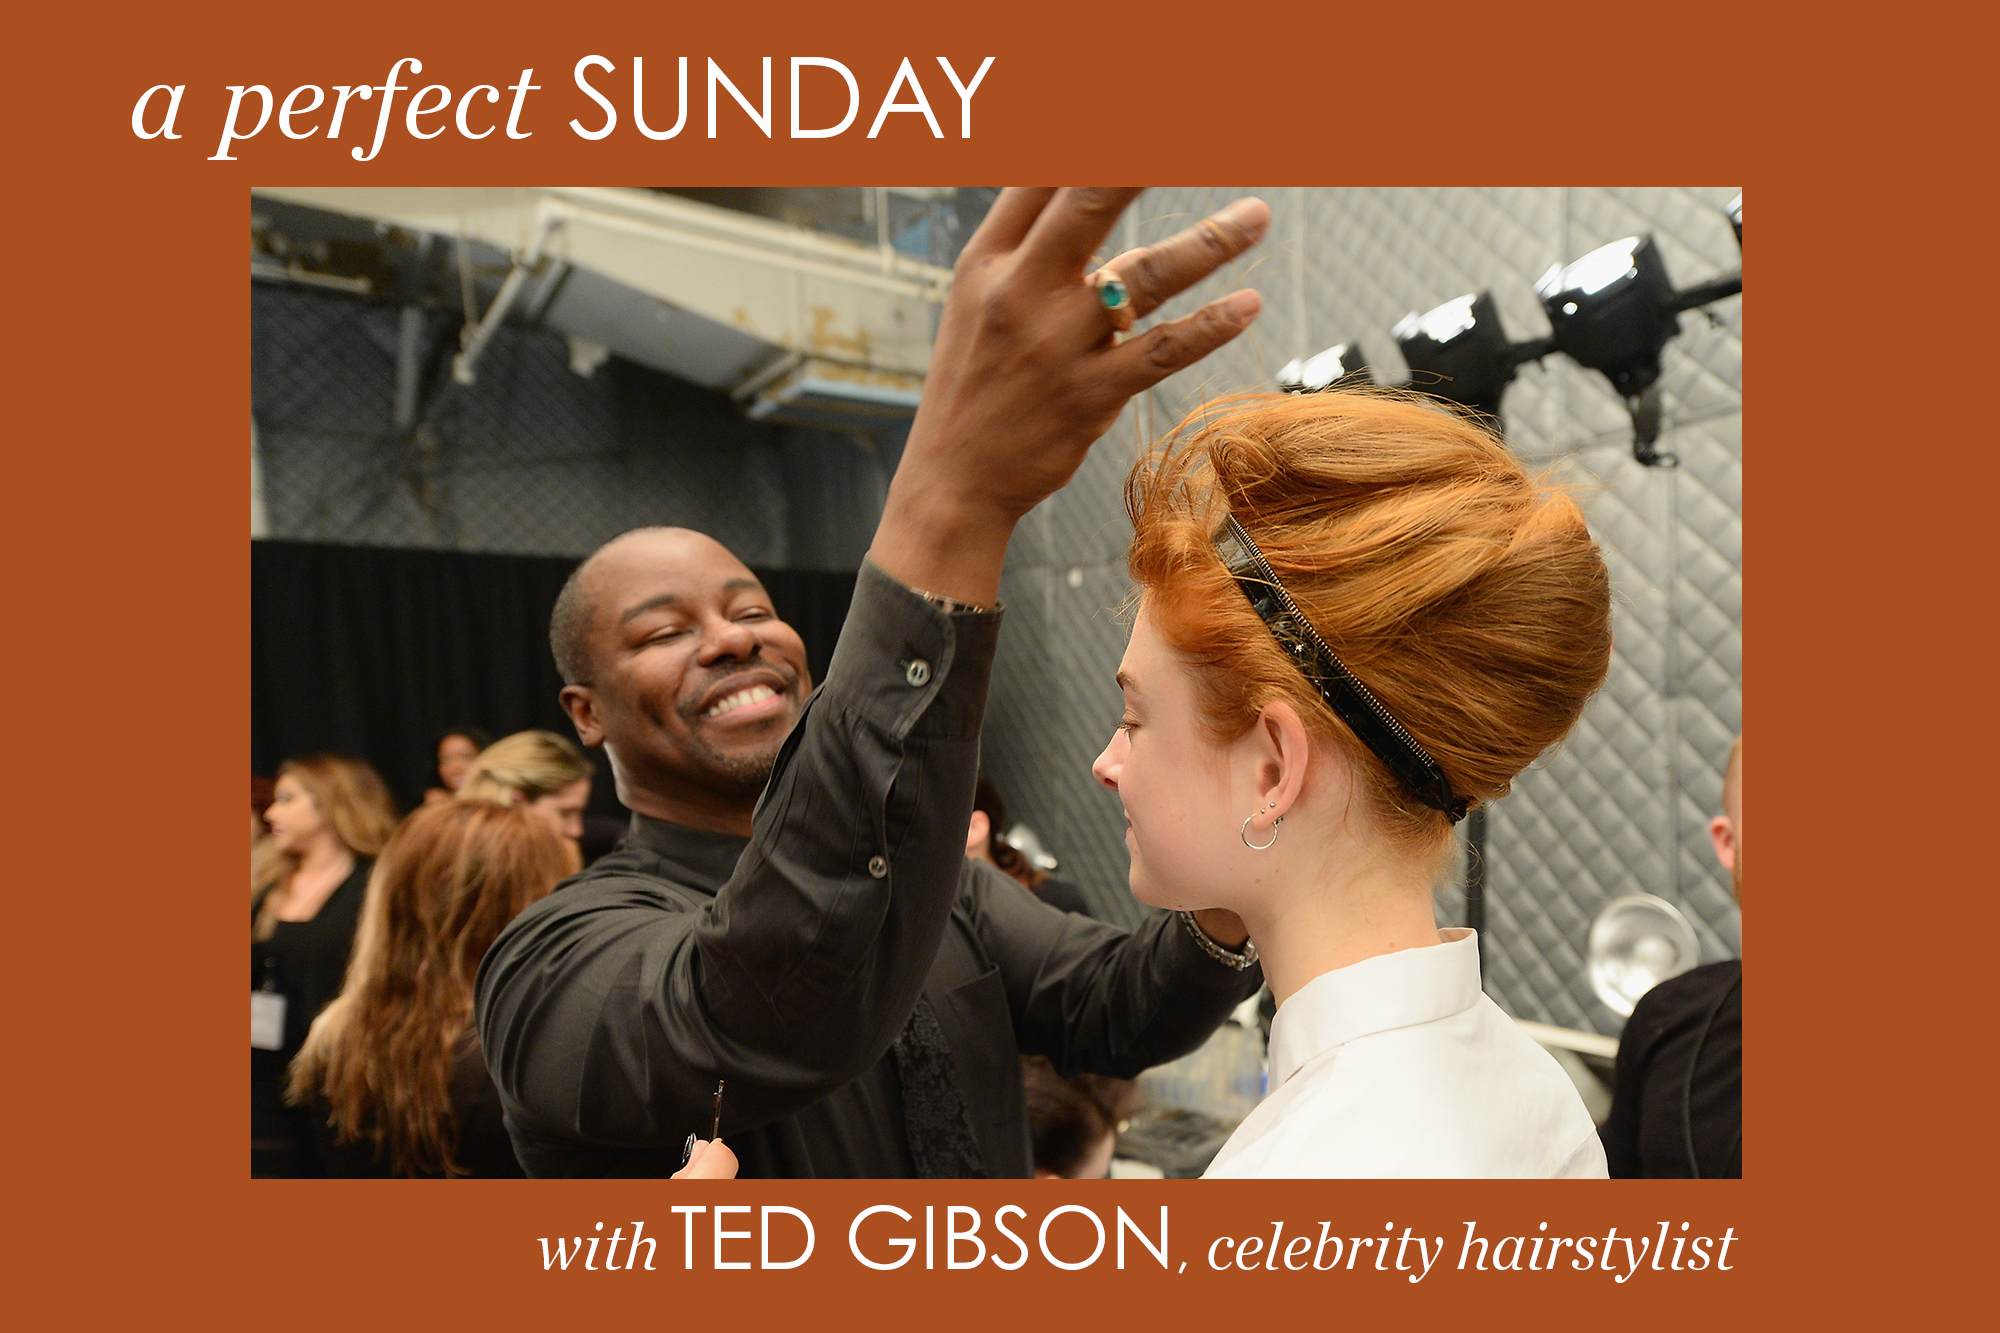 Hair stylest Ted Gibson prepares a model backstage at fashion week.